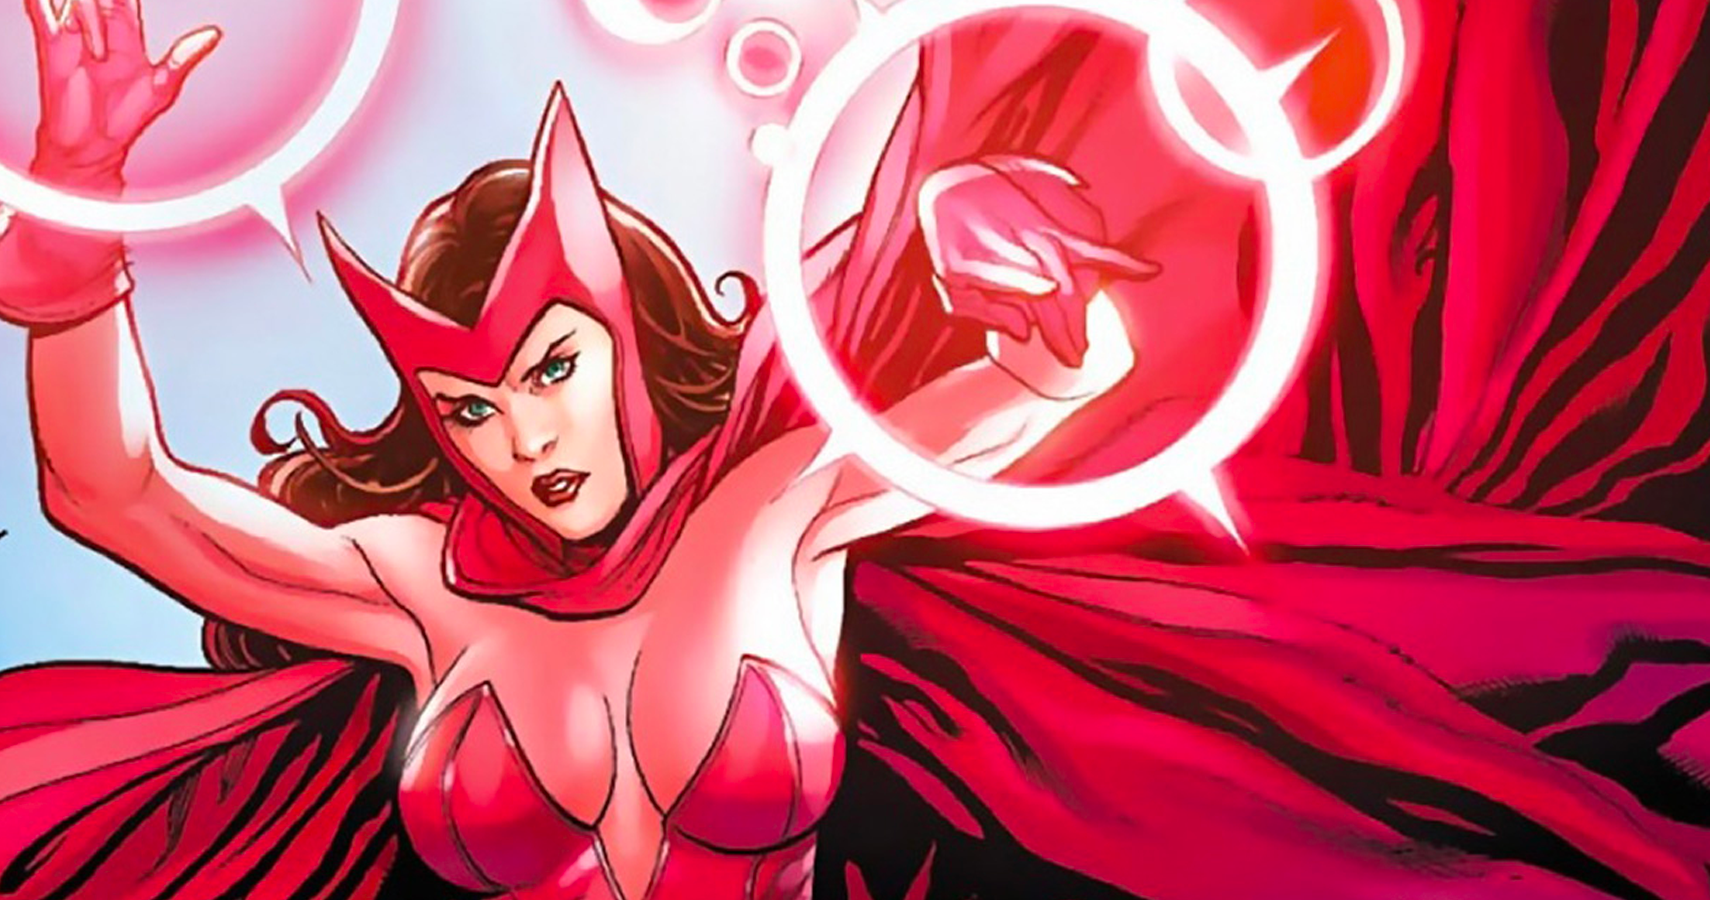 Scarlet Witch for 'Avengers', 'X-Men'?